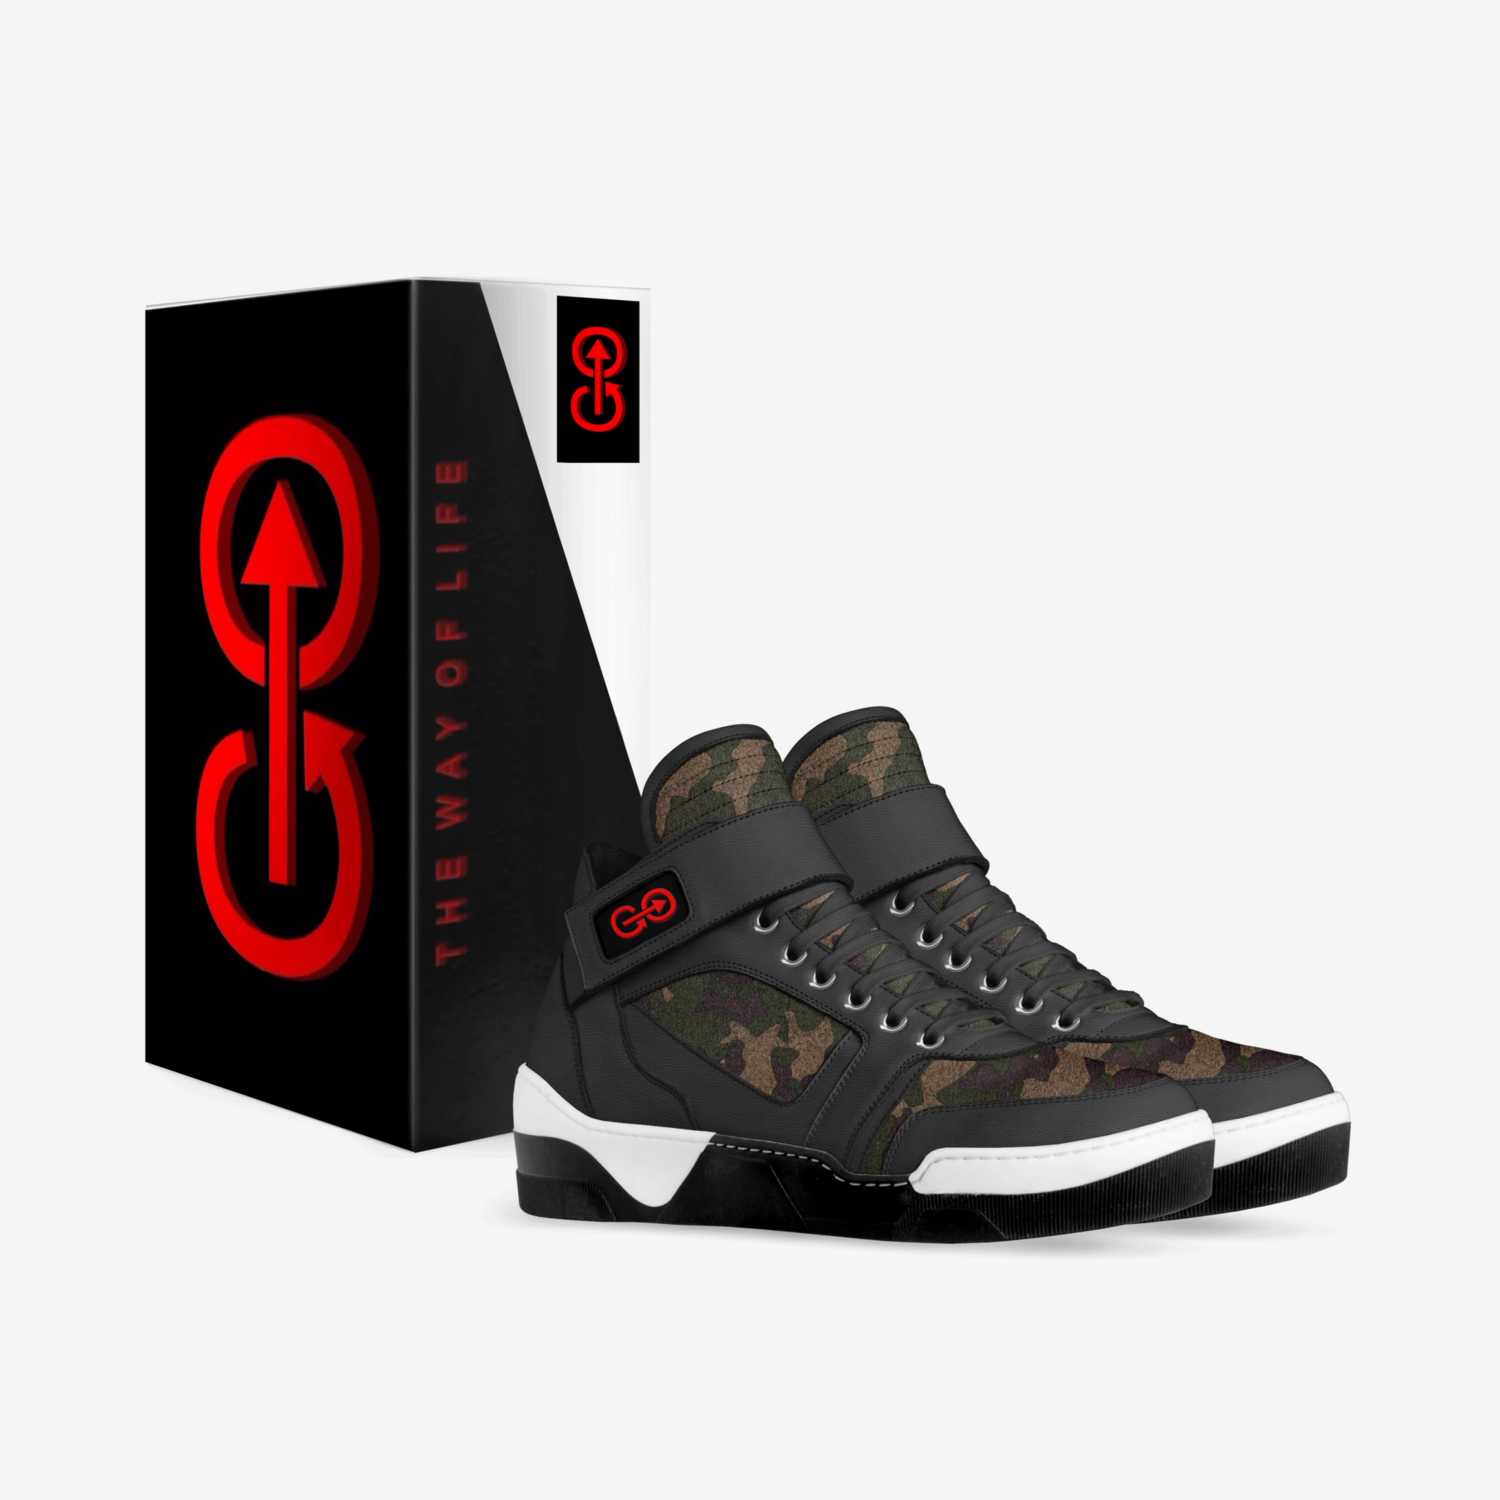 G-->O custom made in Italy shoes by Dennard Johnson | Box view